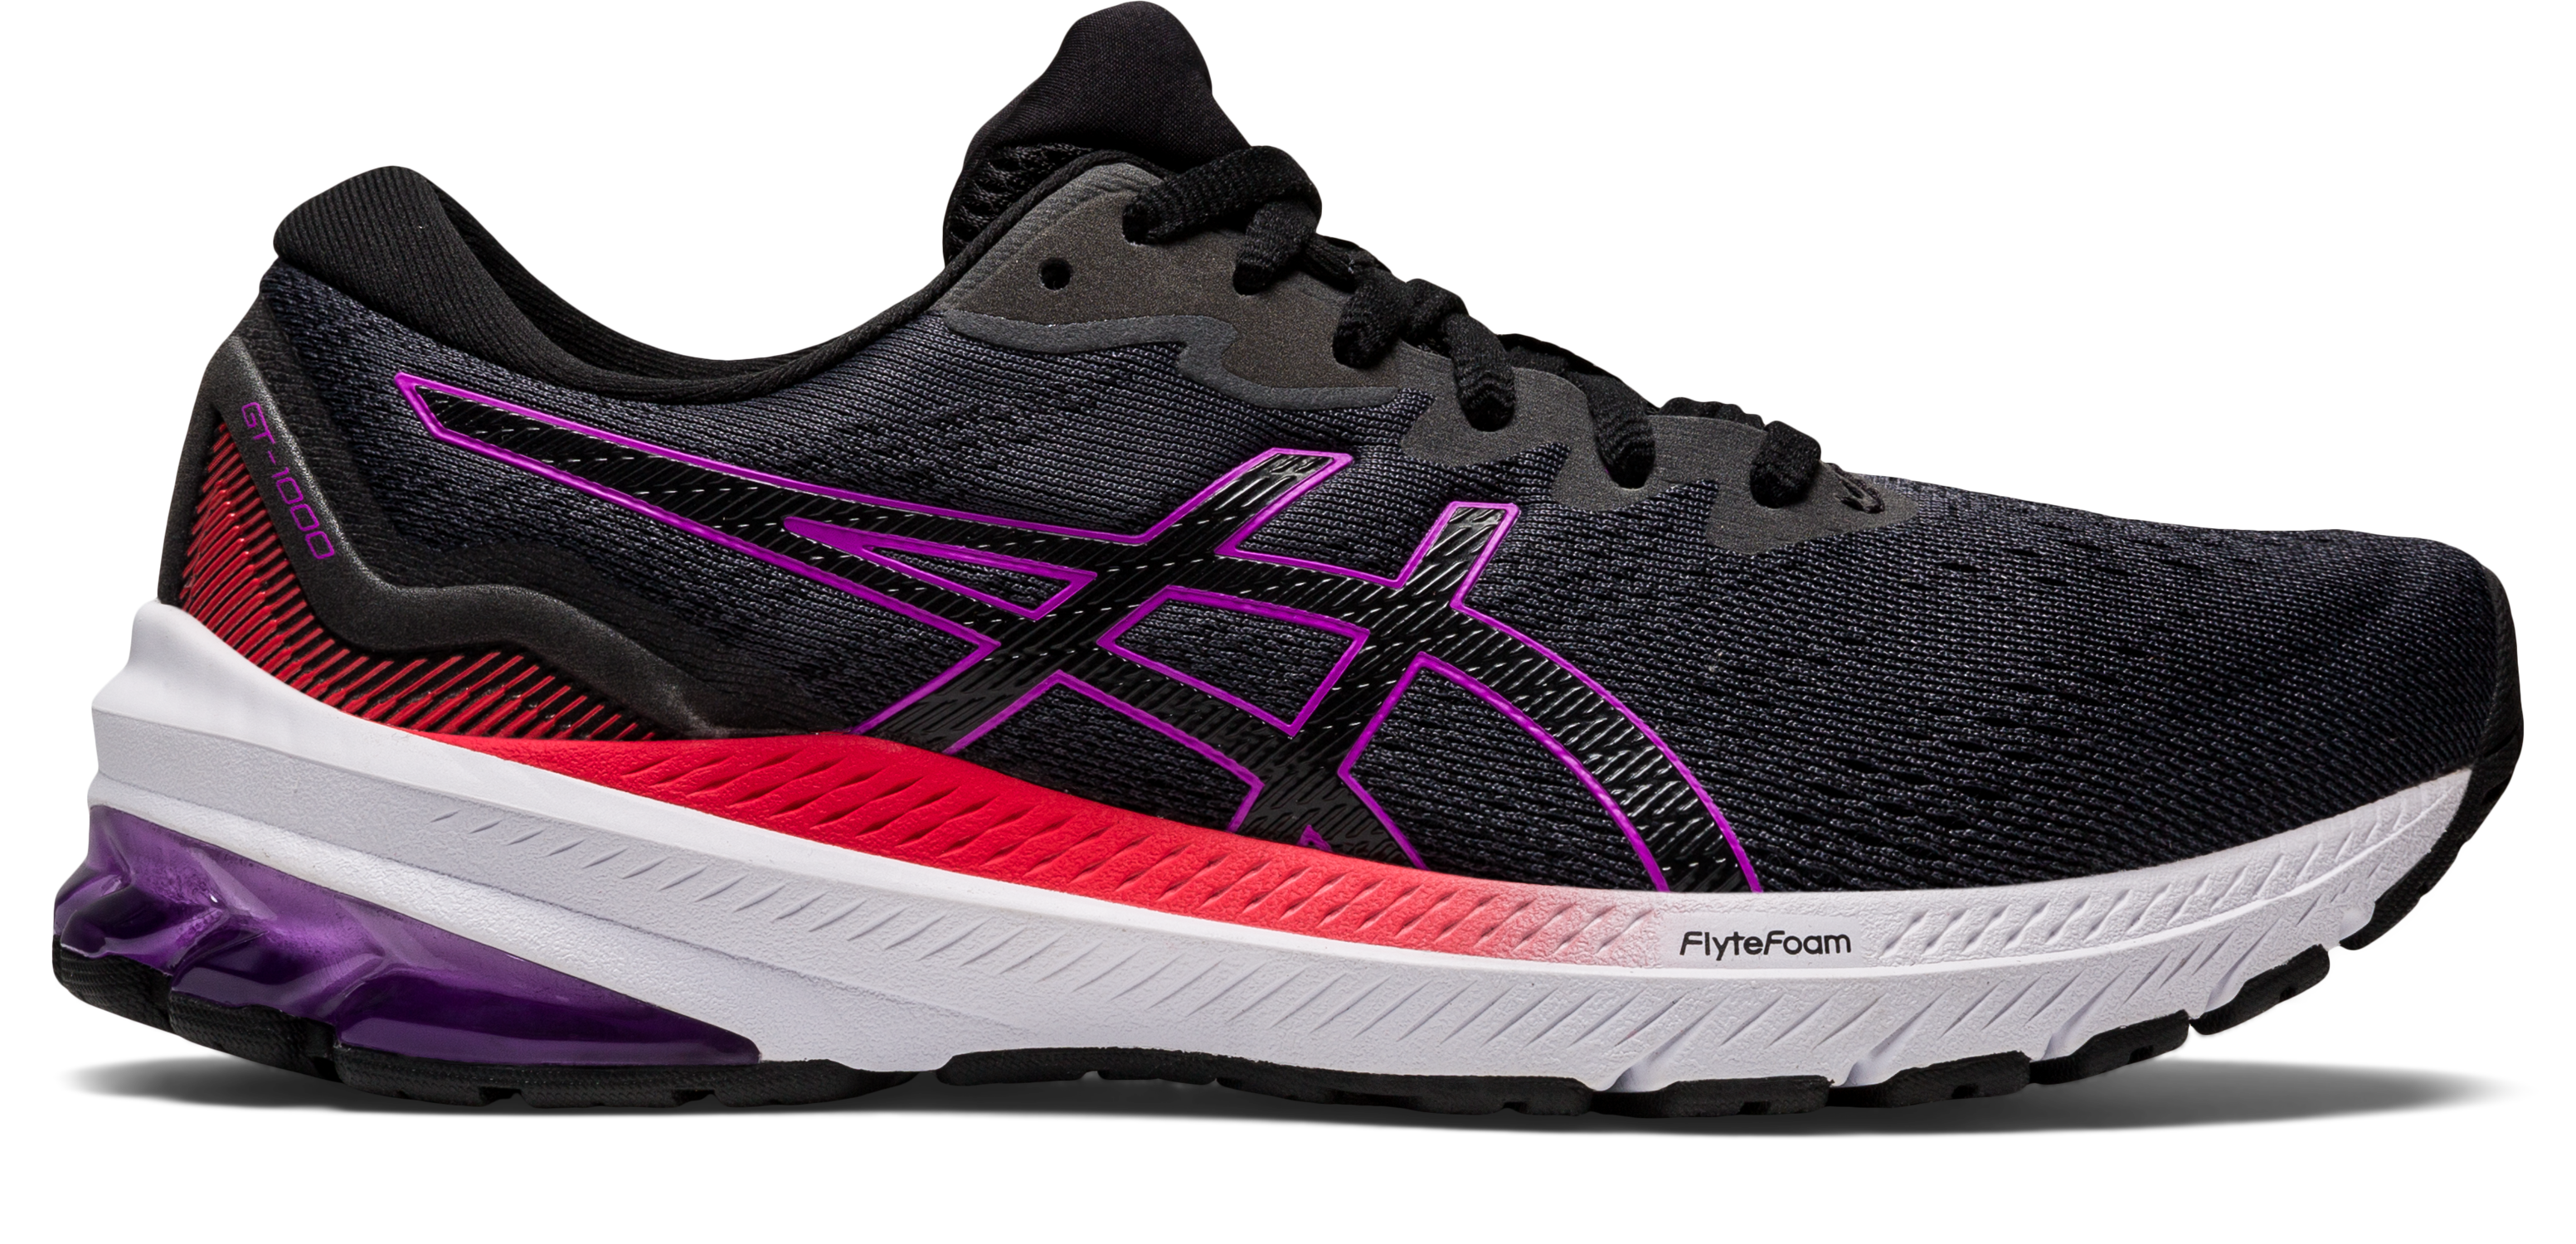 Asics Women's GT-1000 11 Running Shoes in Black/Orchid